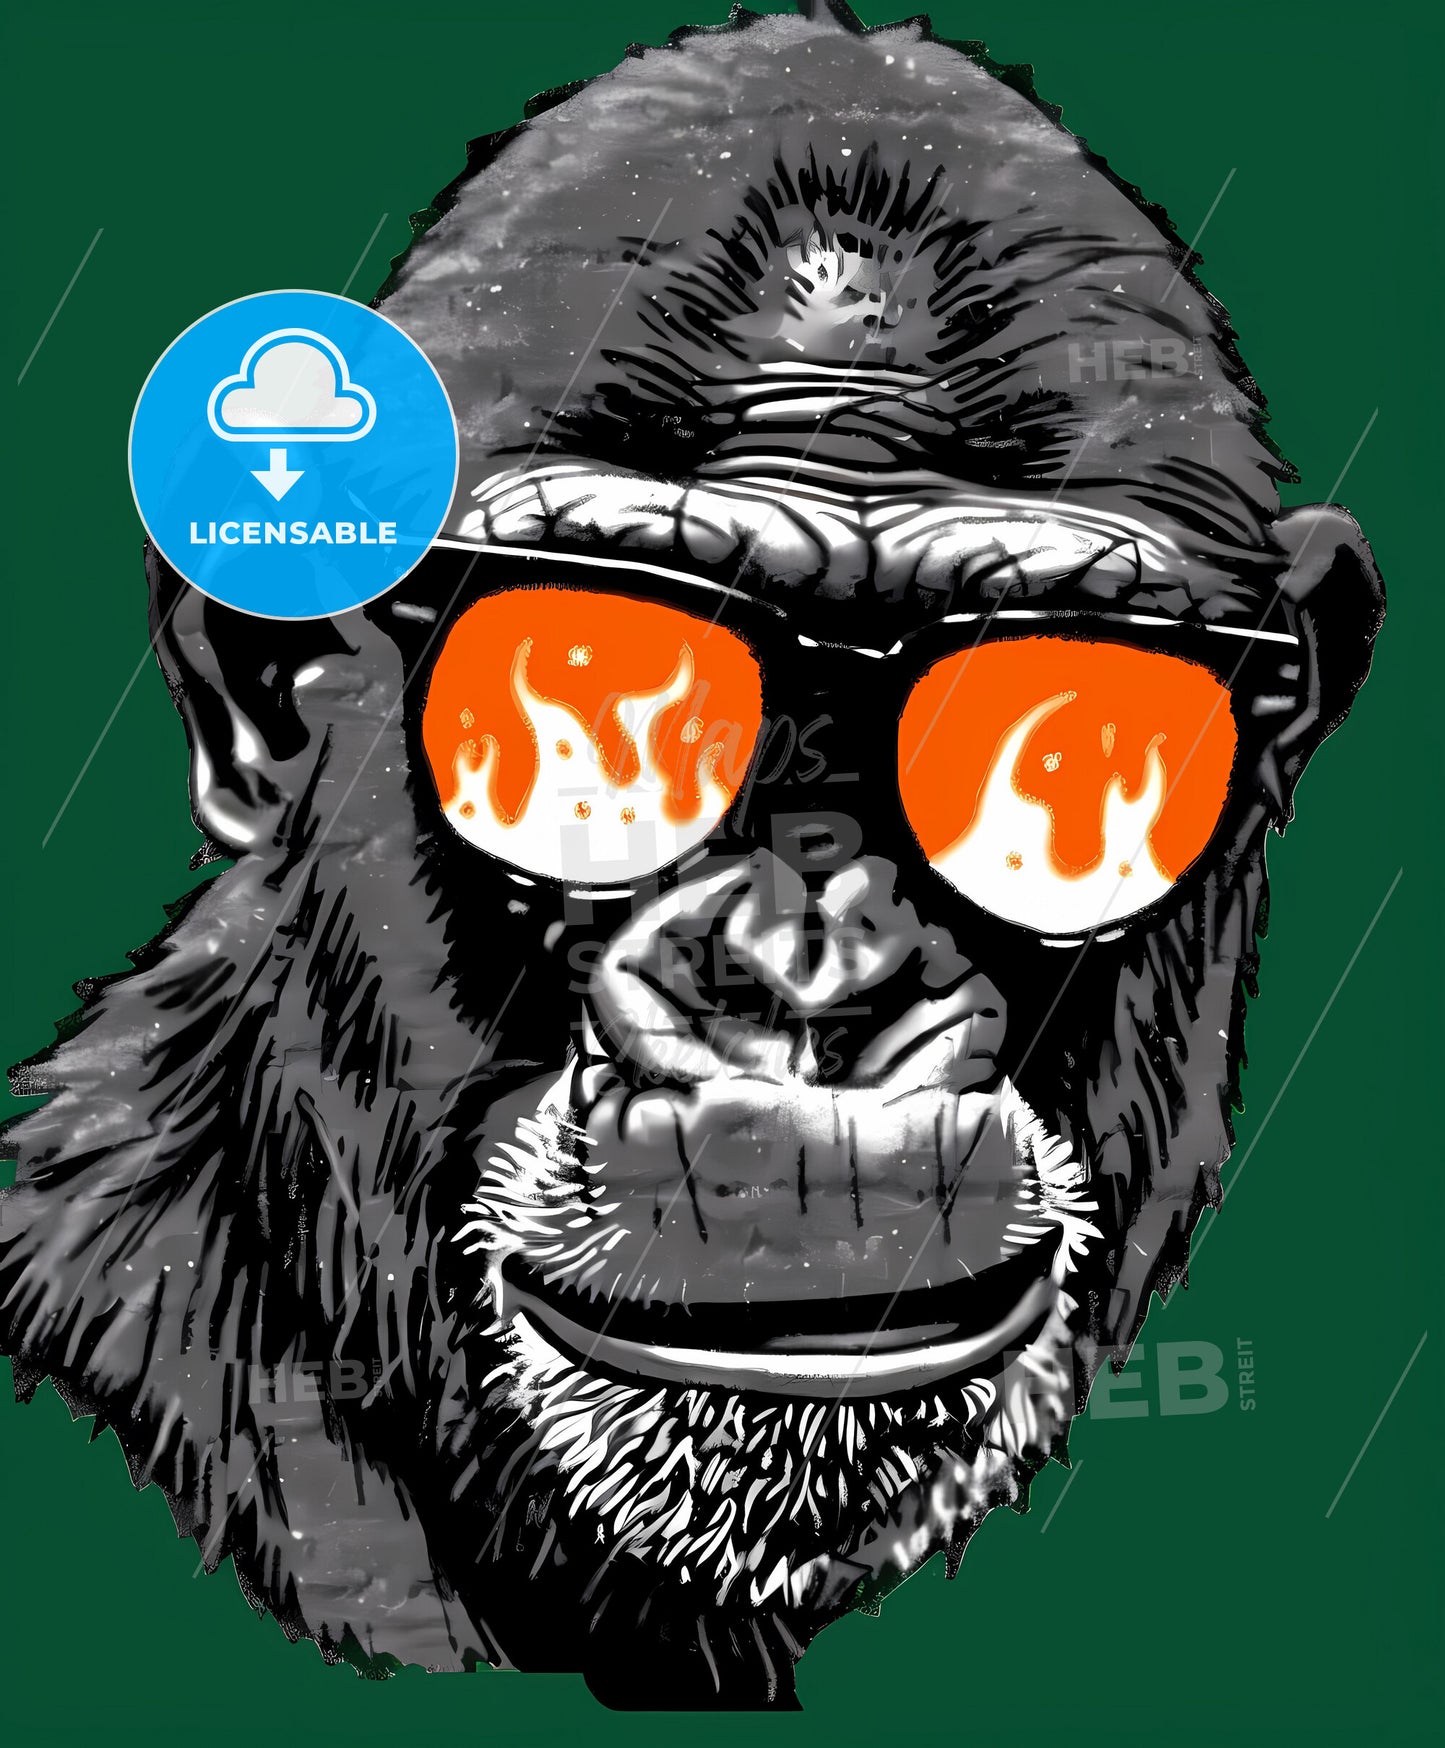 Ape T-Shirt Logo: Animated Chromatic Gorilla in Sunglasses with Flames in Gadgetpunk Style on Green Background